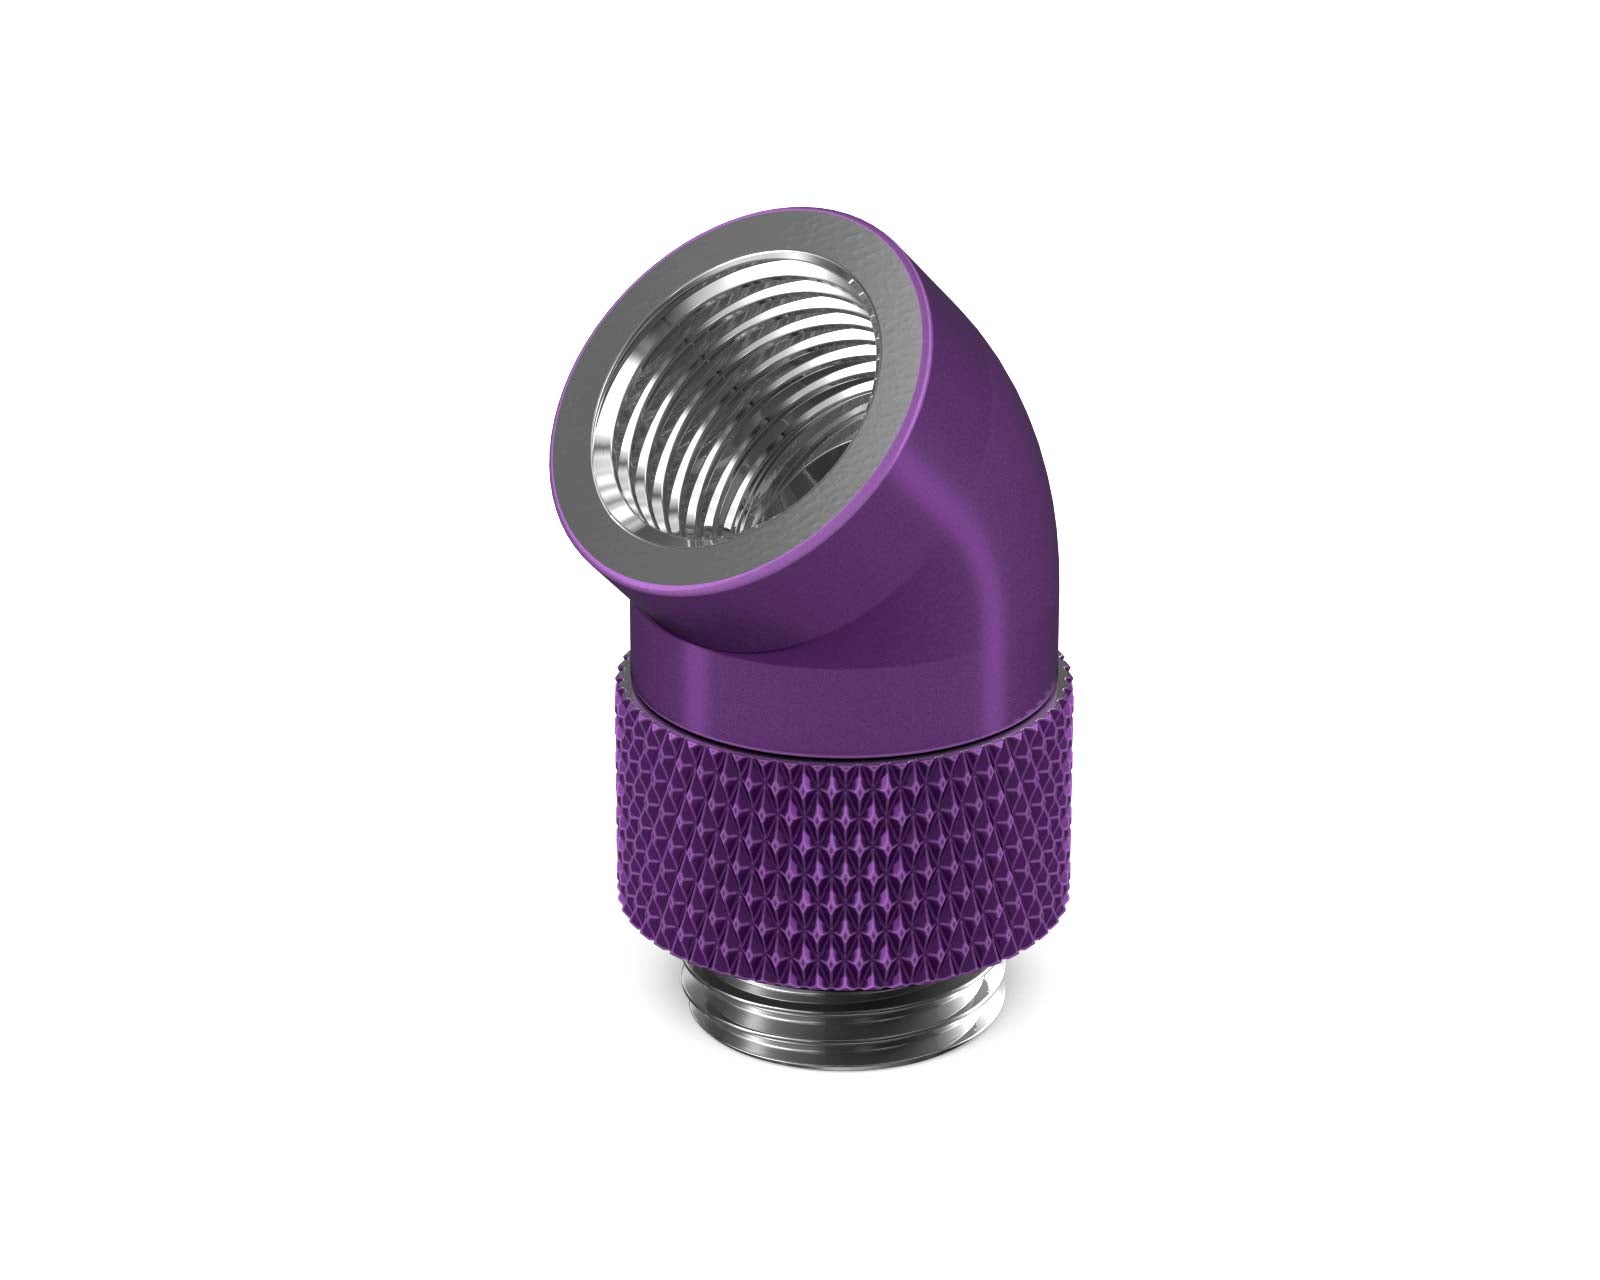 PrimoChill Male to Female G 1/4in. 45 Degree SX Rotary Elbow Fitting - PrimoChill - KEEPING IT COOL Candy Purple